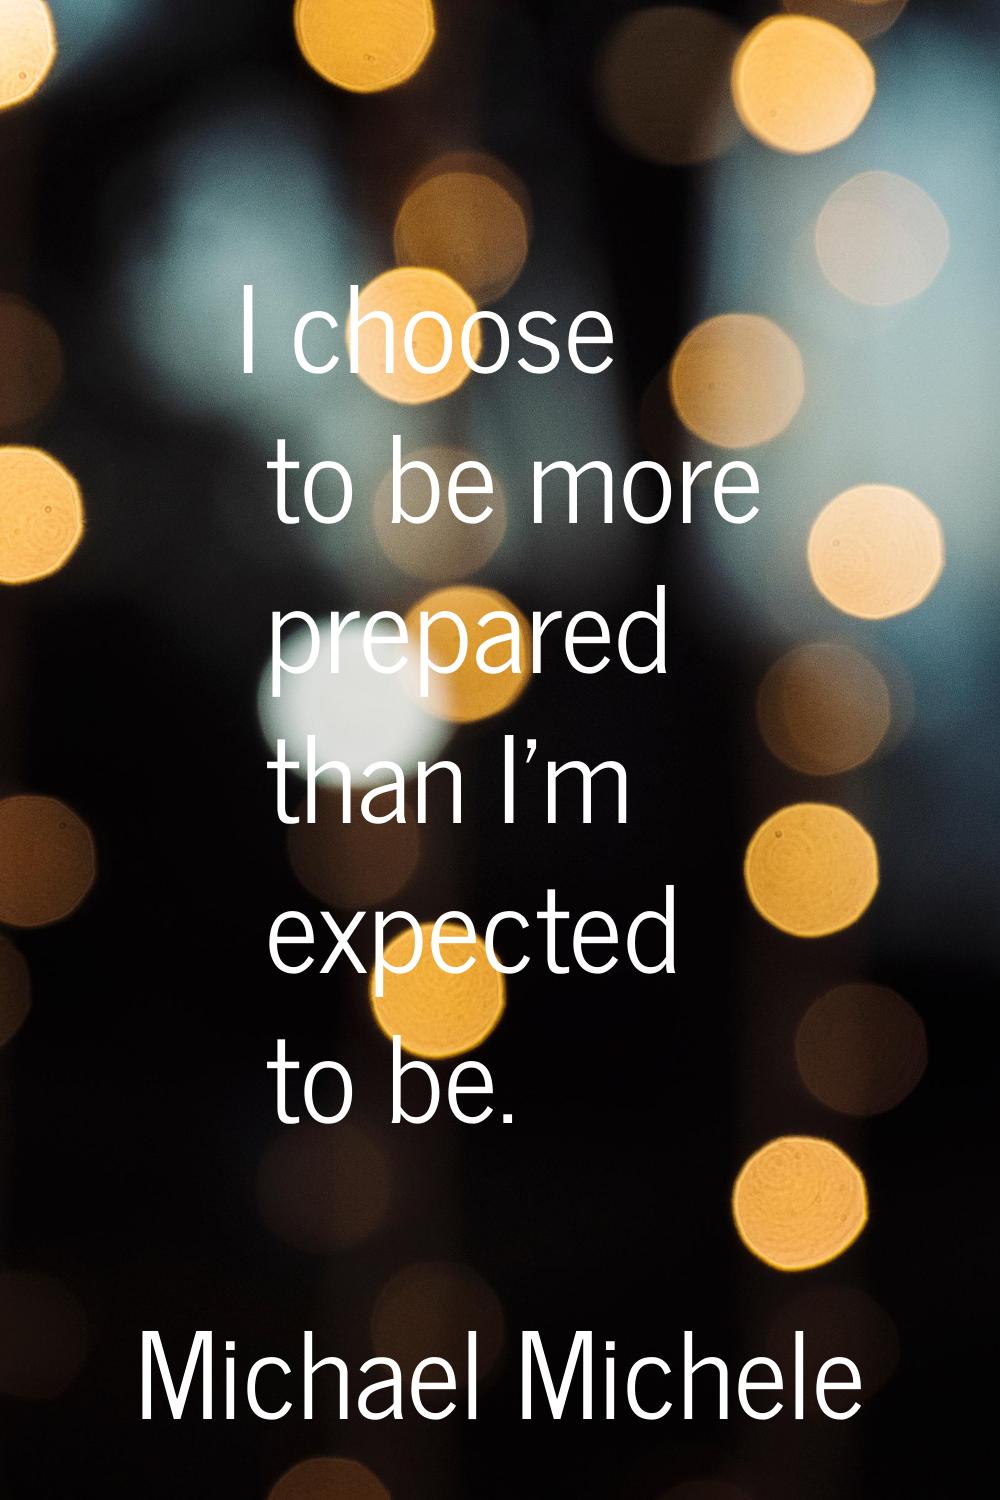 I choose to be more prepared than I'm expected to be.